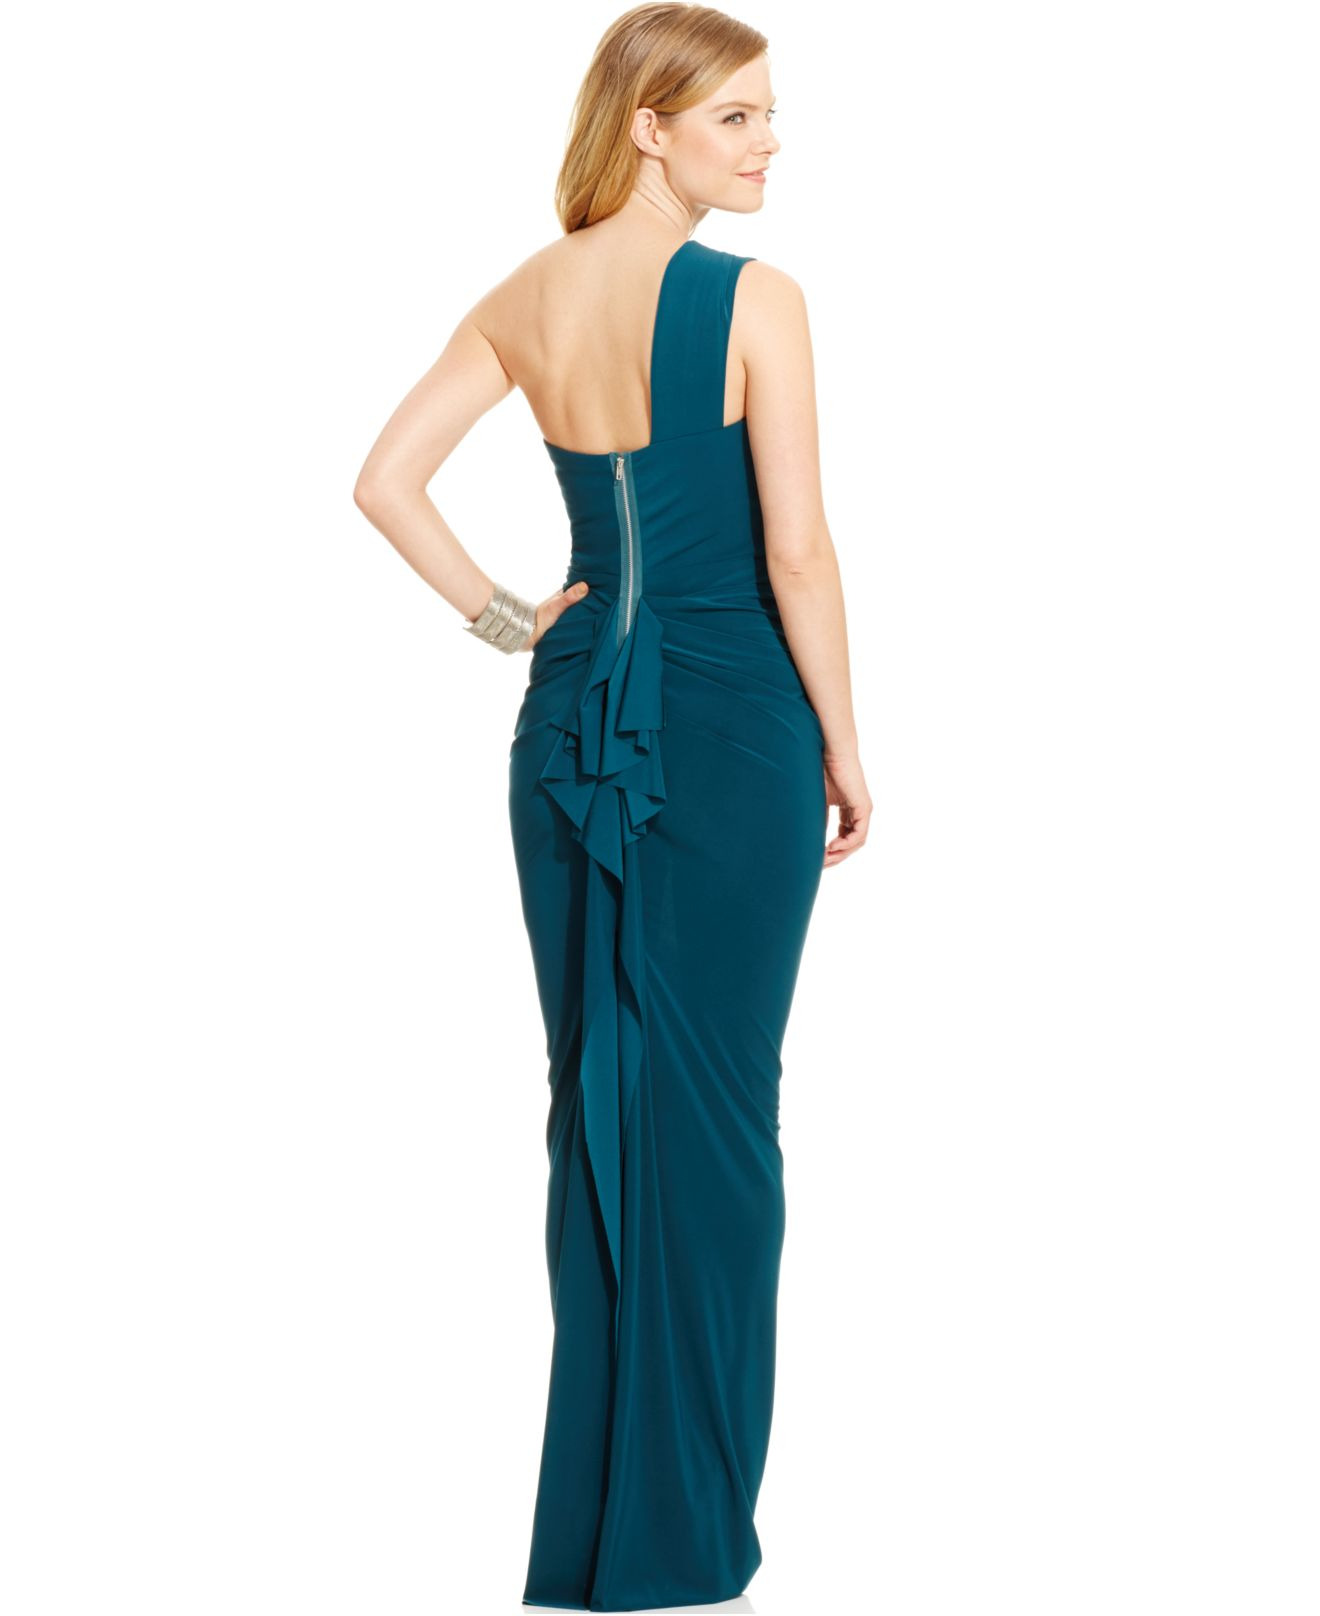 Xscape Synthetic Ruffle-back One-shoulder Gown in Emerald (Blue) - Lyst